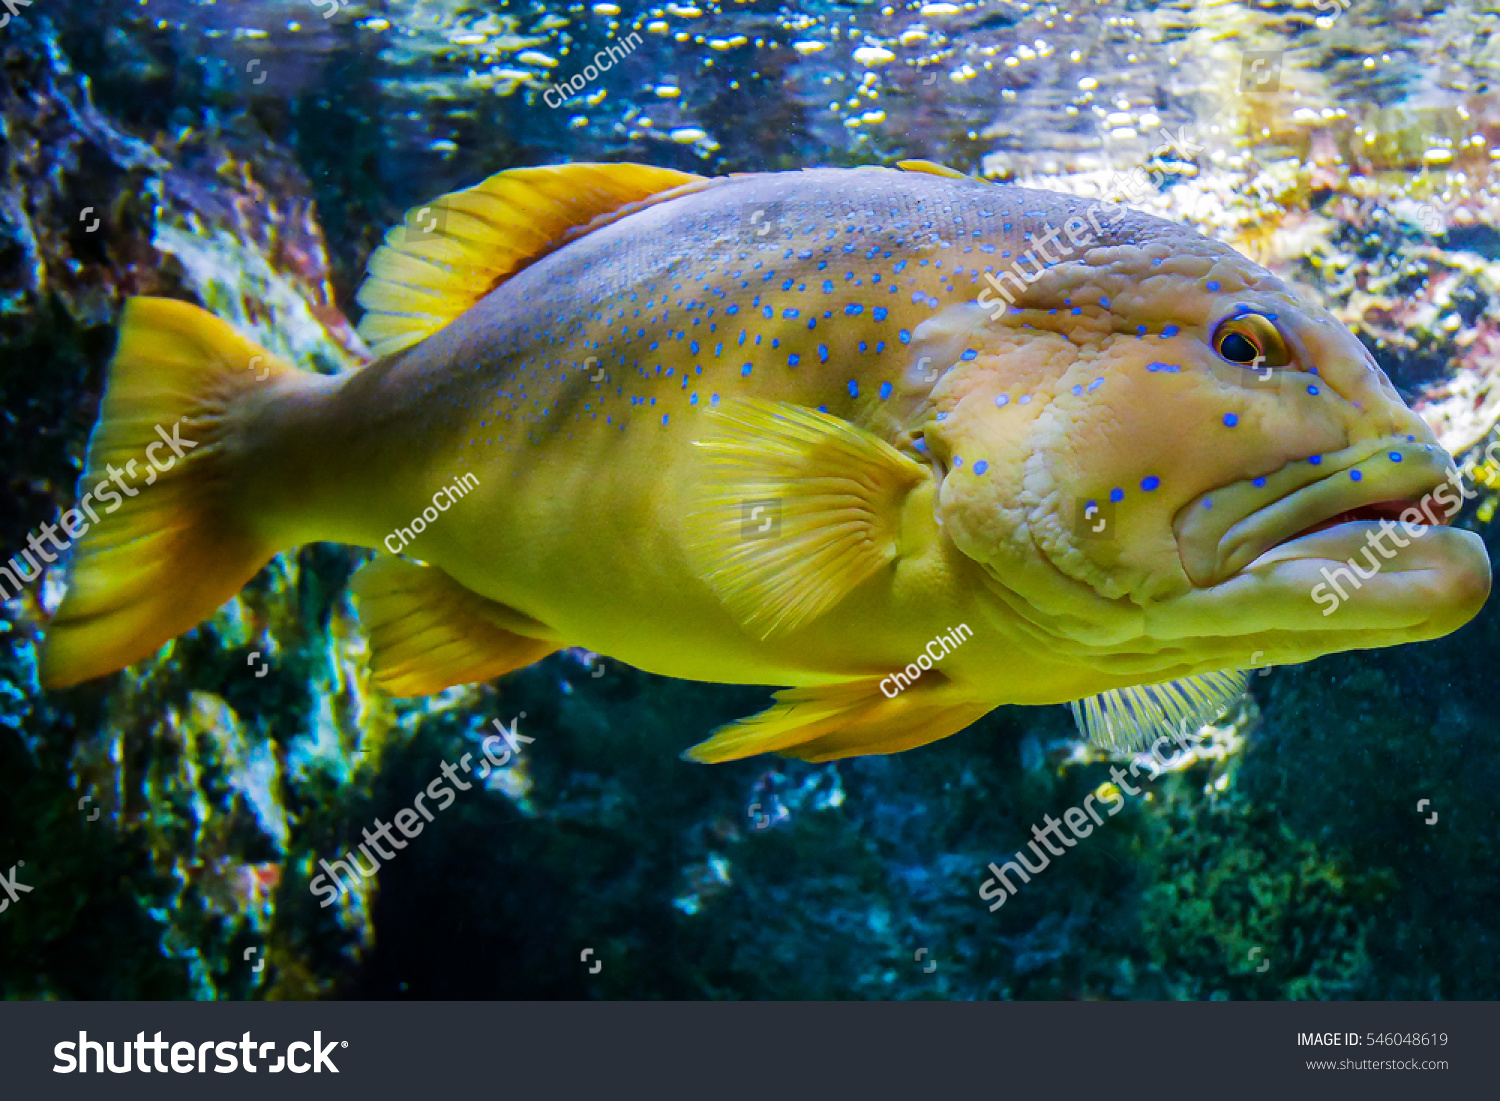 Blue Spotted Grouper , Pet Fish In Tank Stock Photo 546048619 ...